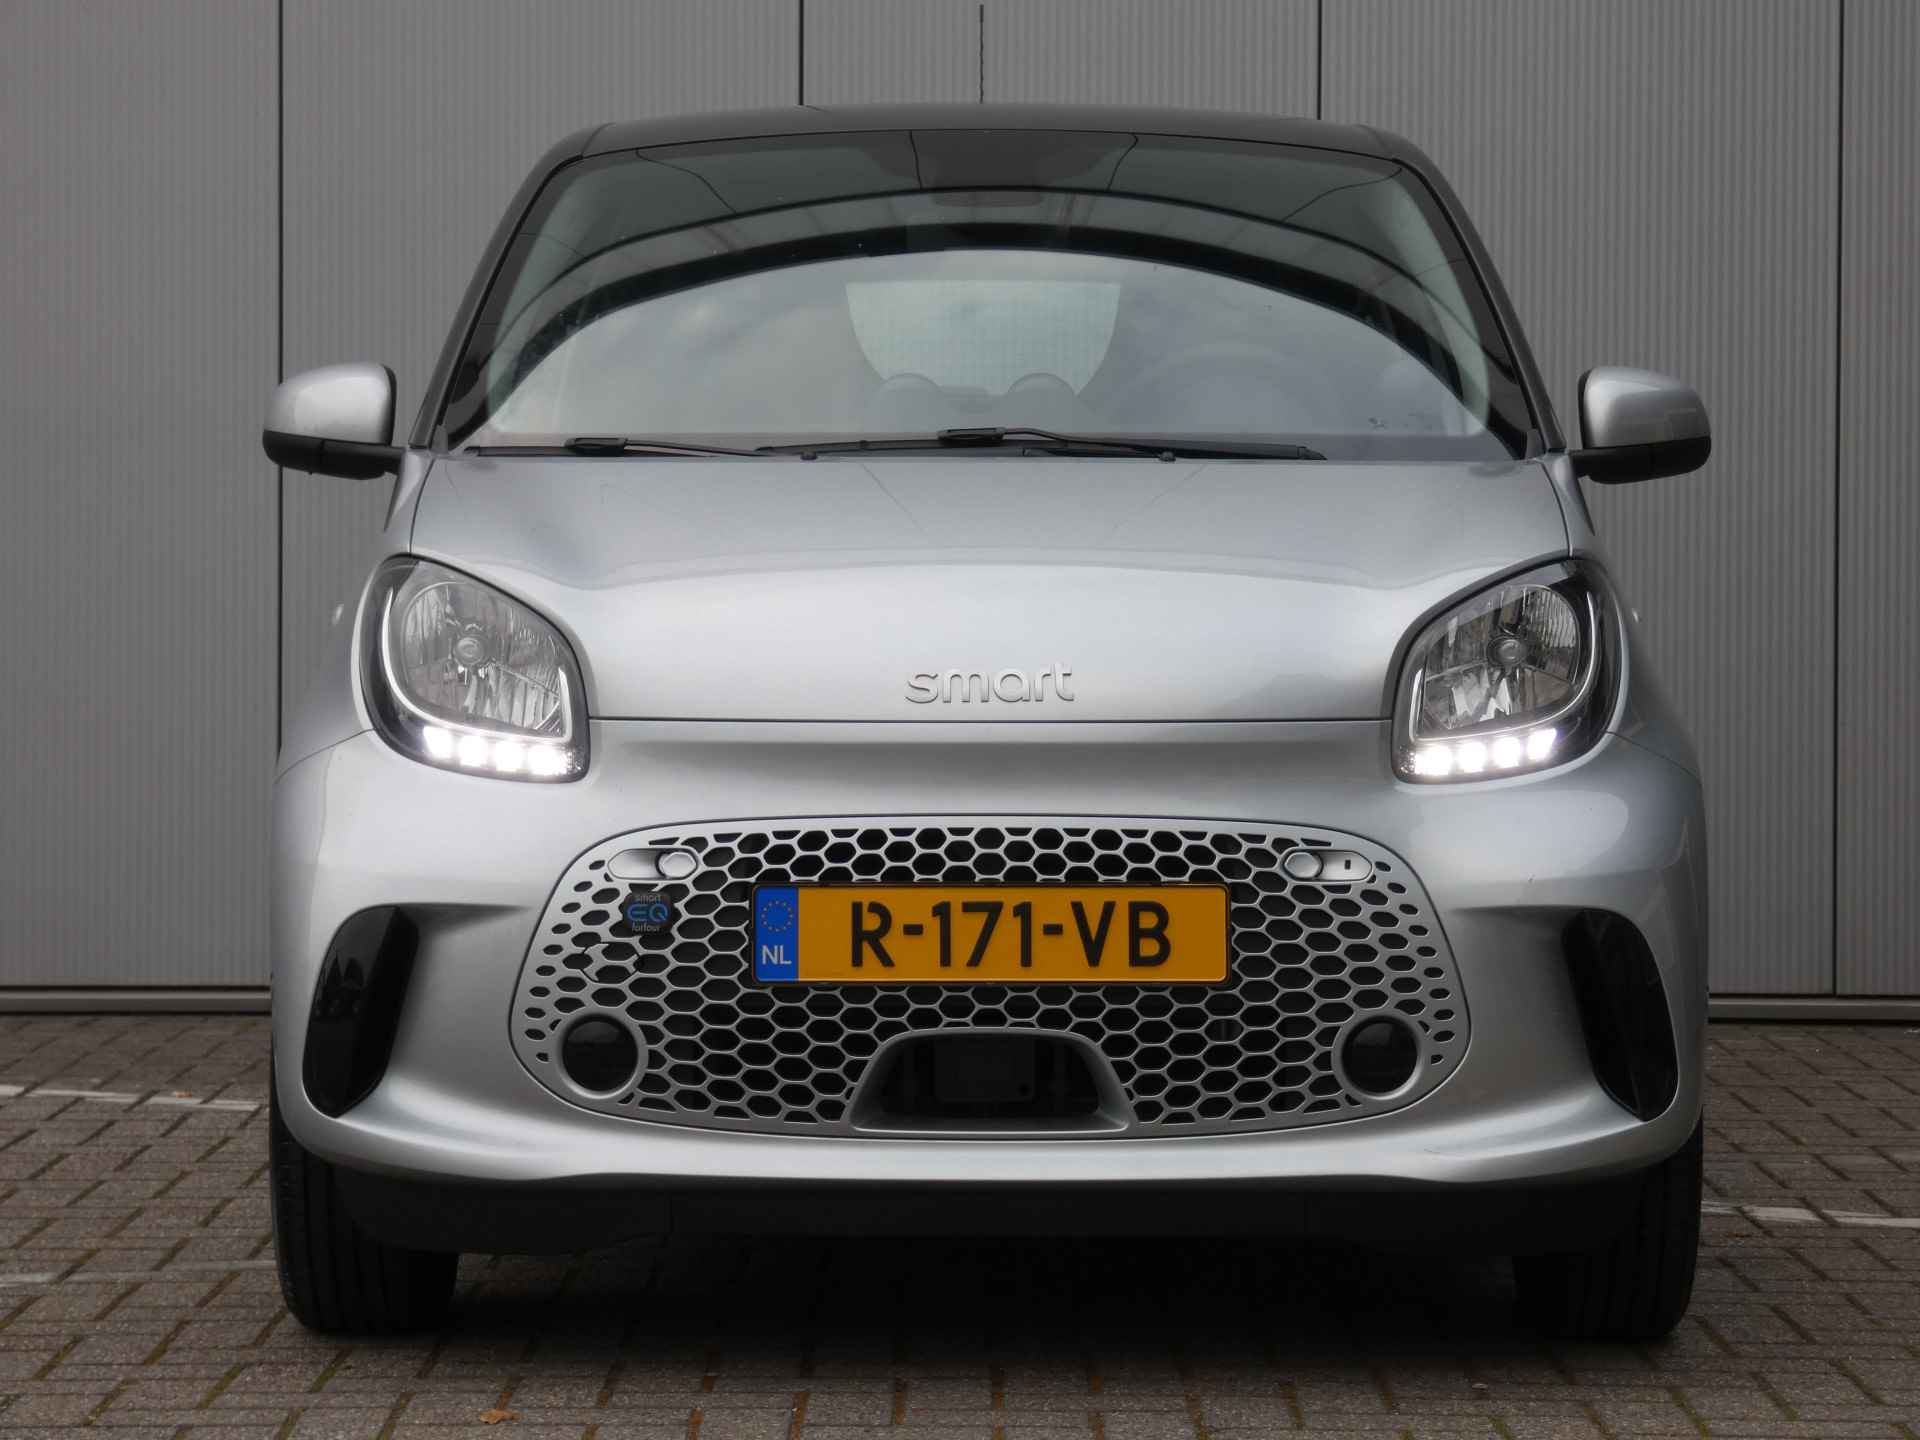 Smart Forfour EQ 17,7KWh | Cruise control | 15" | Automatische airco | € 13.495 na aftrek subsidie - 6/39